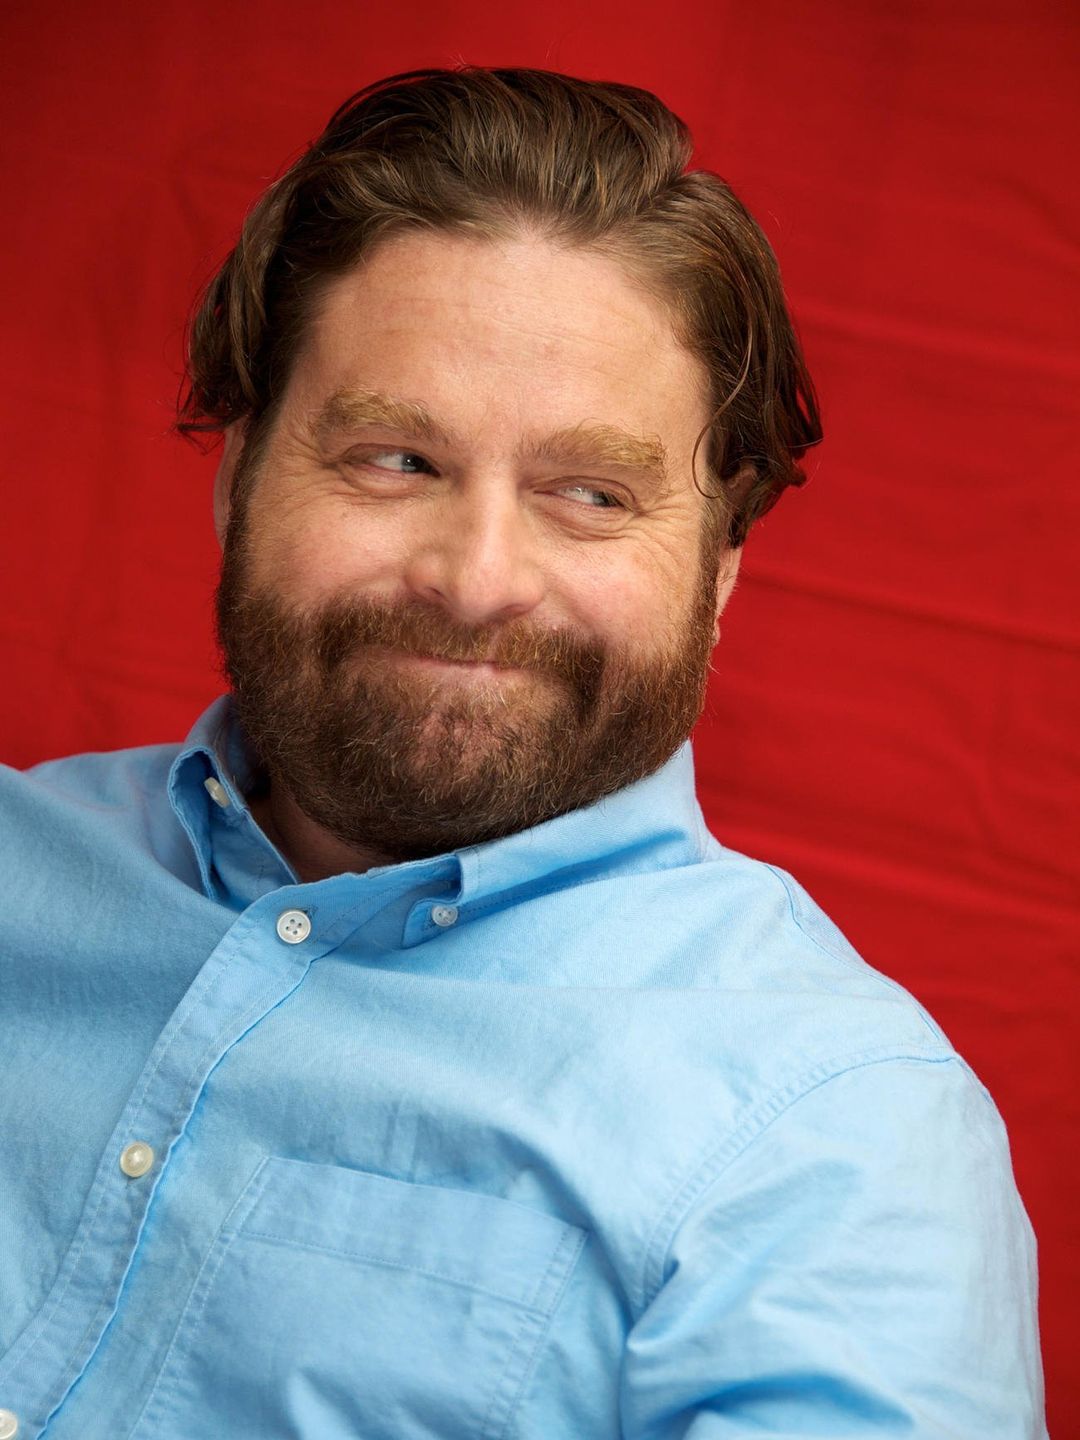 Zach Galifianakis in his youth